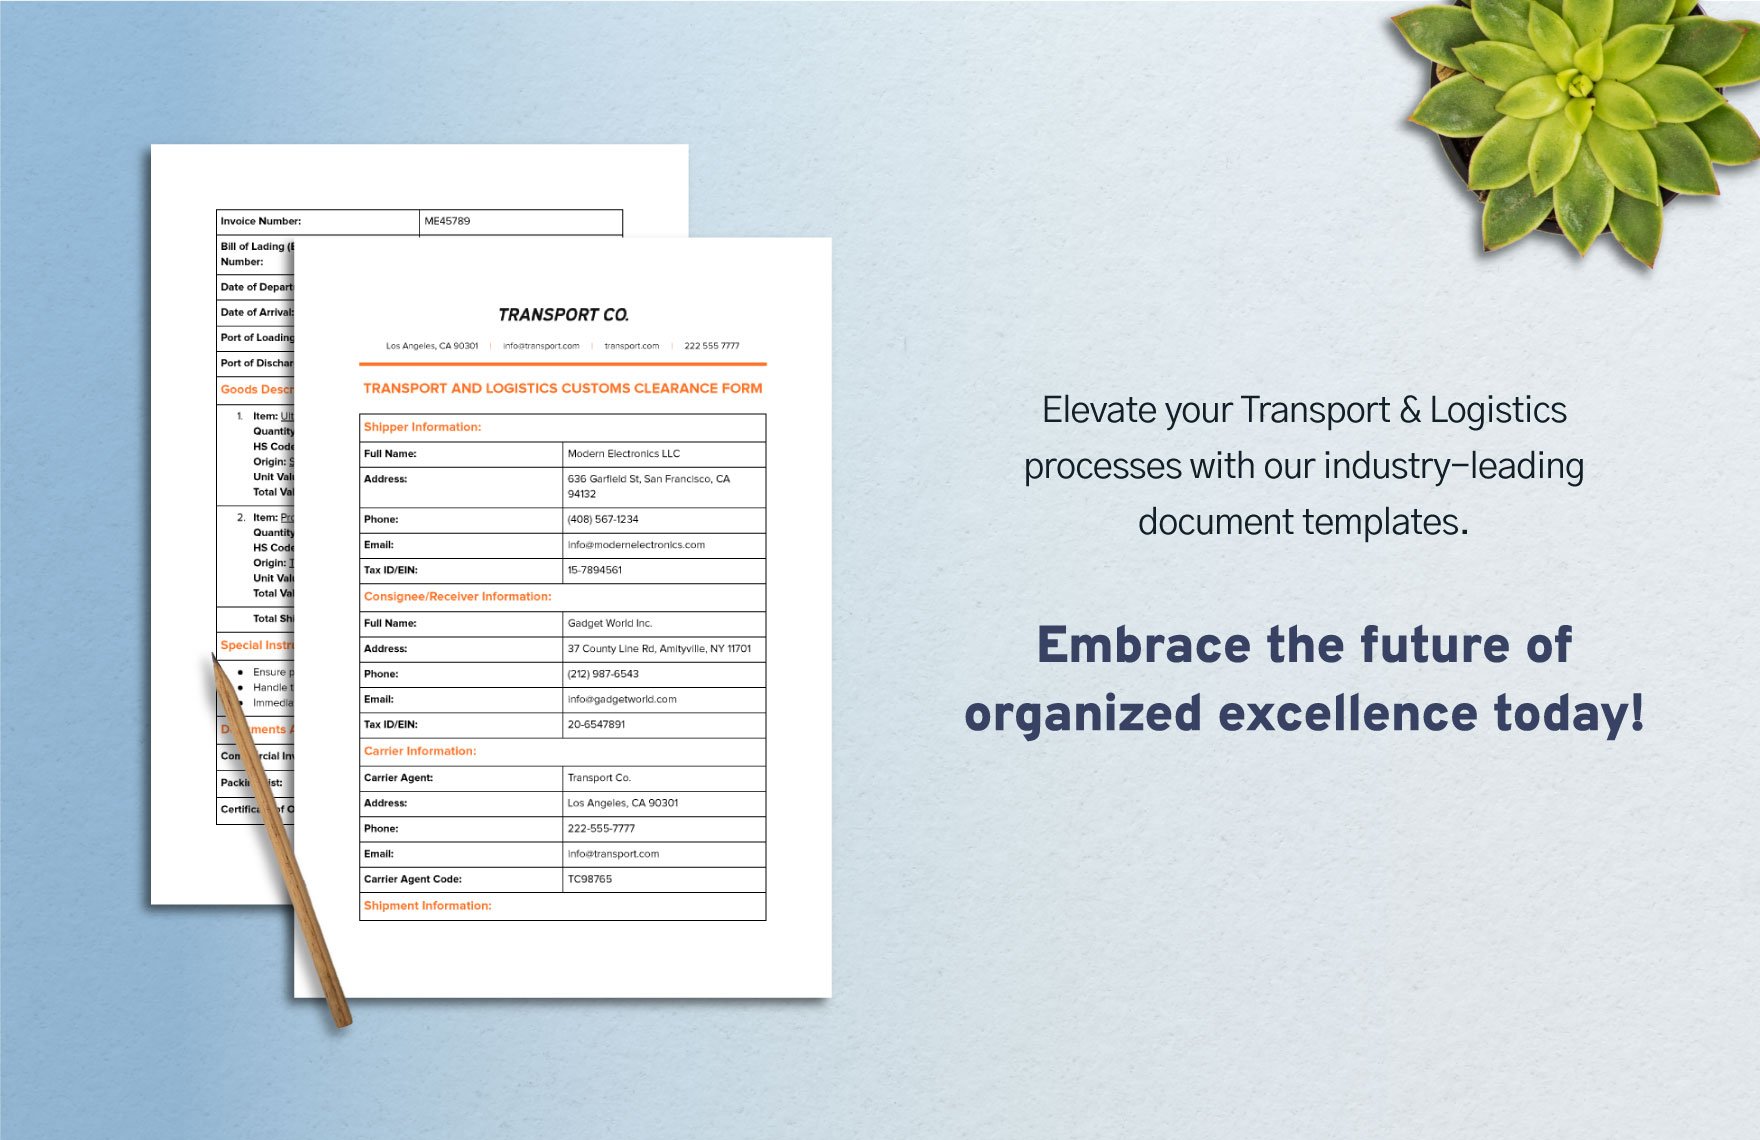 Transport and Logistics Customs Clearance Form Template